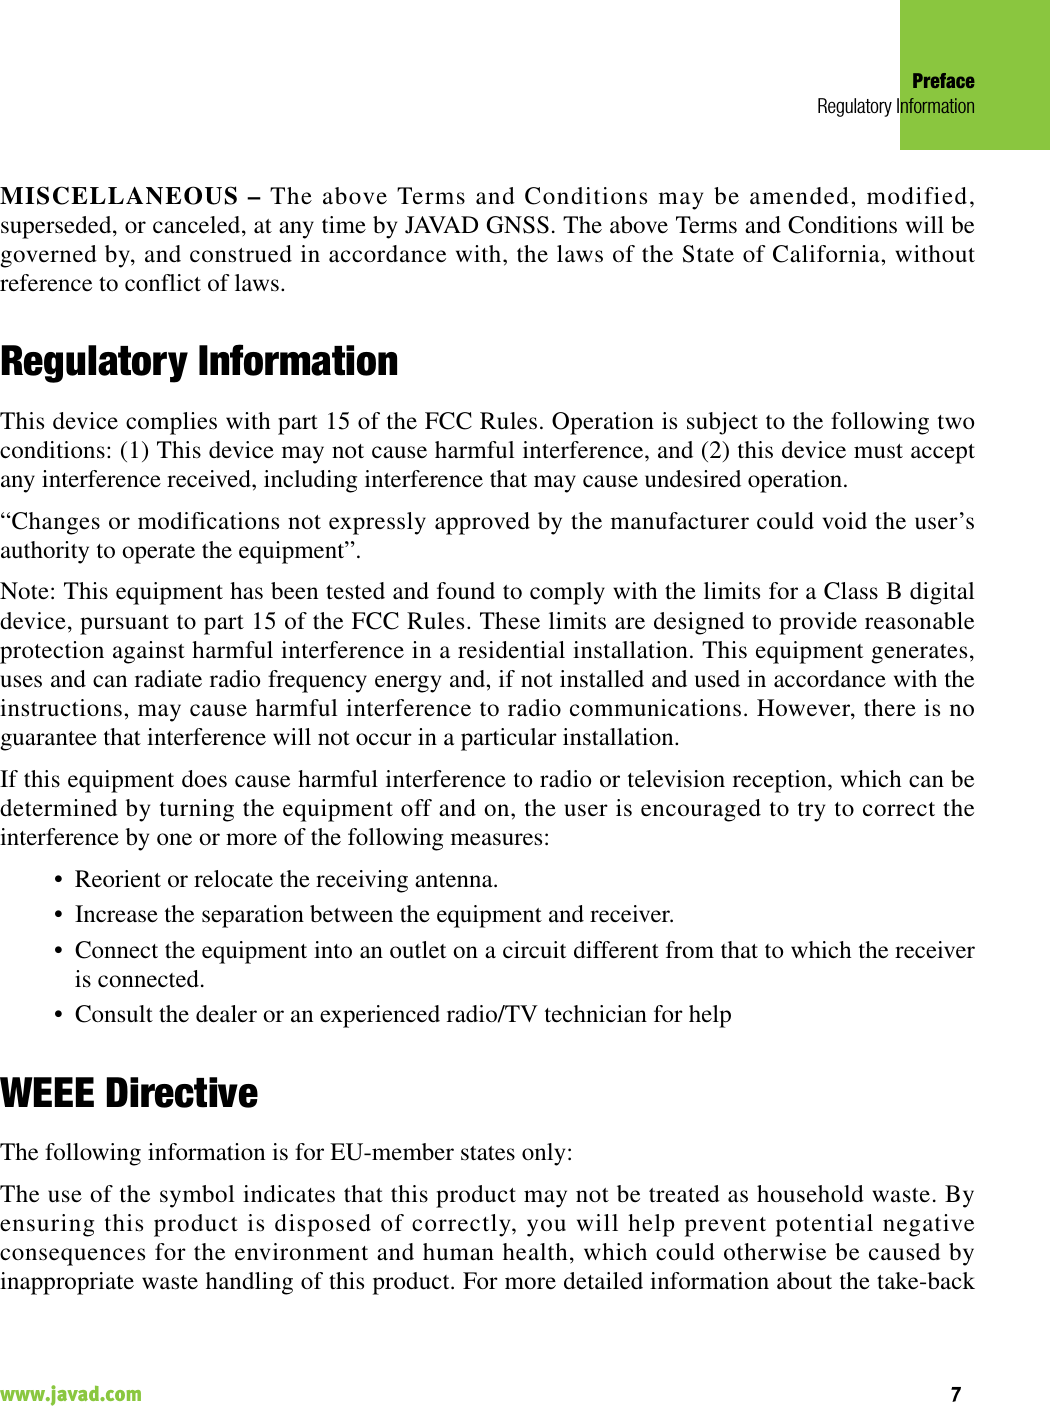 PrefaceRegulatory Information7www.javad.com                                                                                                                                                    MISCELLANEOUS – The above Terms and Conditions may be amended, modified,superseded, or canceled, at any time by JAVAD GNSS. The above Terms and Conditions will begoverned by, and construed in accordance with, the laws of the State of California, withoutreference to conflict of laws.Regulatory InformationThis device complies with part 15 of the FCC Rules. Operation is subject to the following twoconditions: (1) This device may not cause harmful interference, and (2) this device must acceptany interference received, including interference that may cause undesired operation. “Changes or modifications not expressly approved by the manufacturer could void the user’sauthority to operate the equipment”. Note: This equipment has been tested and found to comply with the limits for a Class B digitaldevice, pursuant to part 15 of the FCC Rules. These limits are designed to provide reasonableprotection against harmful interference in a residential installation. This equipment generates,uses and can radiate radio frequency energy and, if not installed and used in accordance with theinstructions, may cause harmful interference to radio communications. However, there is noguarantee that interference will not occur in a particular installation. If this equipment does cause harmful interference to radio or television reception, which can bedetermined by turning the equipment off and on, the user is encouraged to try to correct theinterference by one or more of the following measures:• Reorient or relocate the receiving antenna.• Increase the separation between the equipment and receiver.• Connect the equipment into an outlet on a circuit different from that to which the receiveris connected.• Consult the dealer or an experienced radio/TV technician for helpWEEE DirectiveThe following information is for EU-member states only:The use of the symbol indicates that this product may not be treated as household waste. Byensuring this product is disposed of correctly, you will help prevent potential negativeconsequences for the environment and human health, which could otherwise be caused byinappropriate waste handling of this product. For more detailed information about the take-back